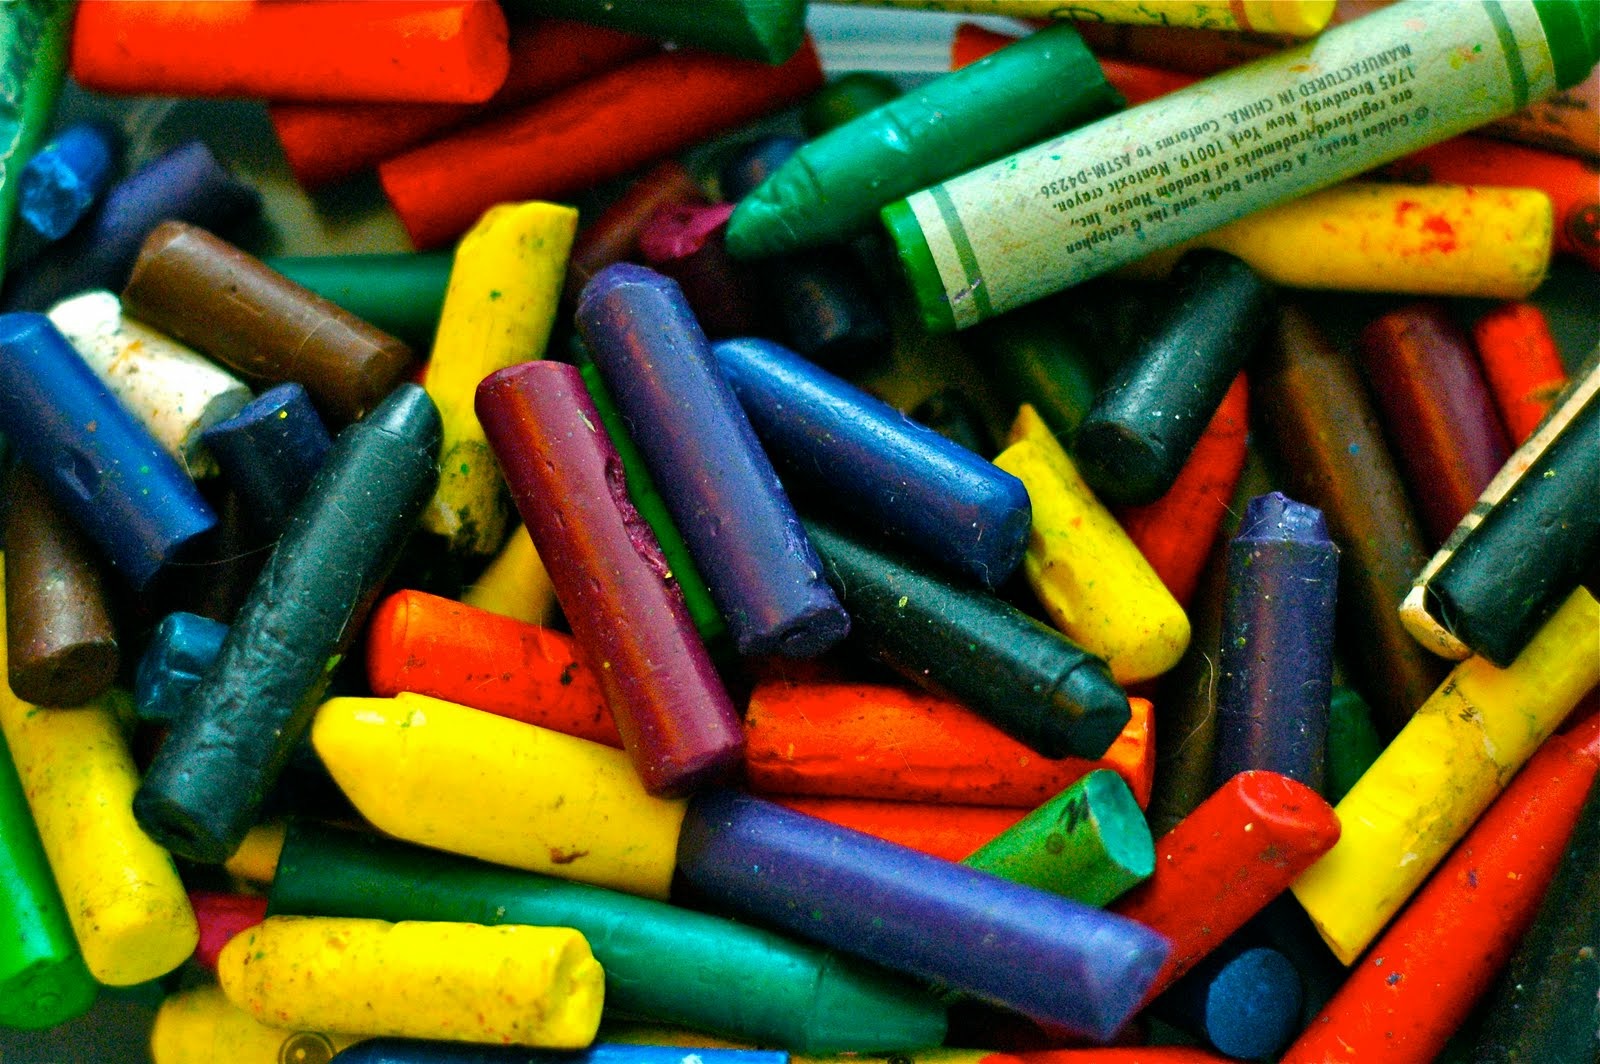 Image of all different colored broken crayons.